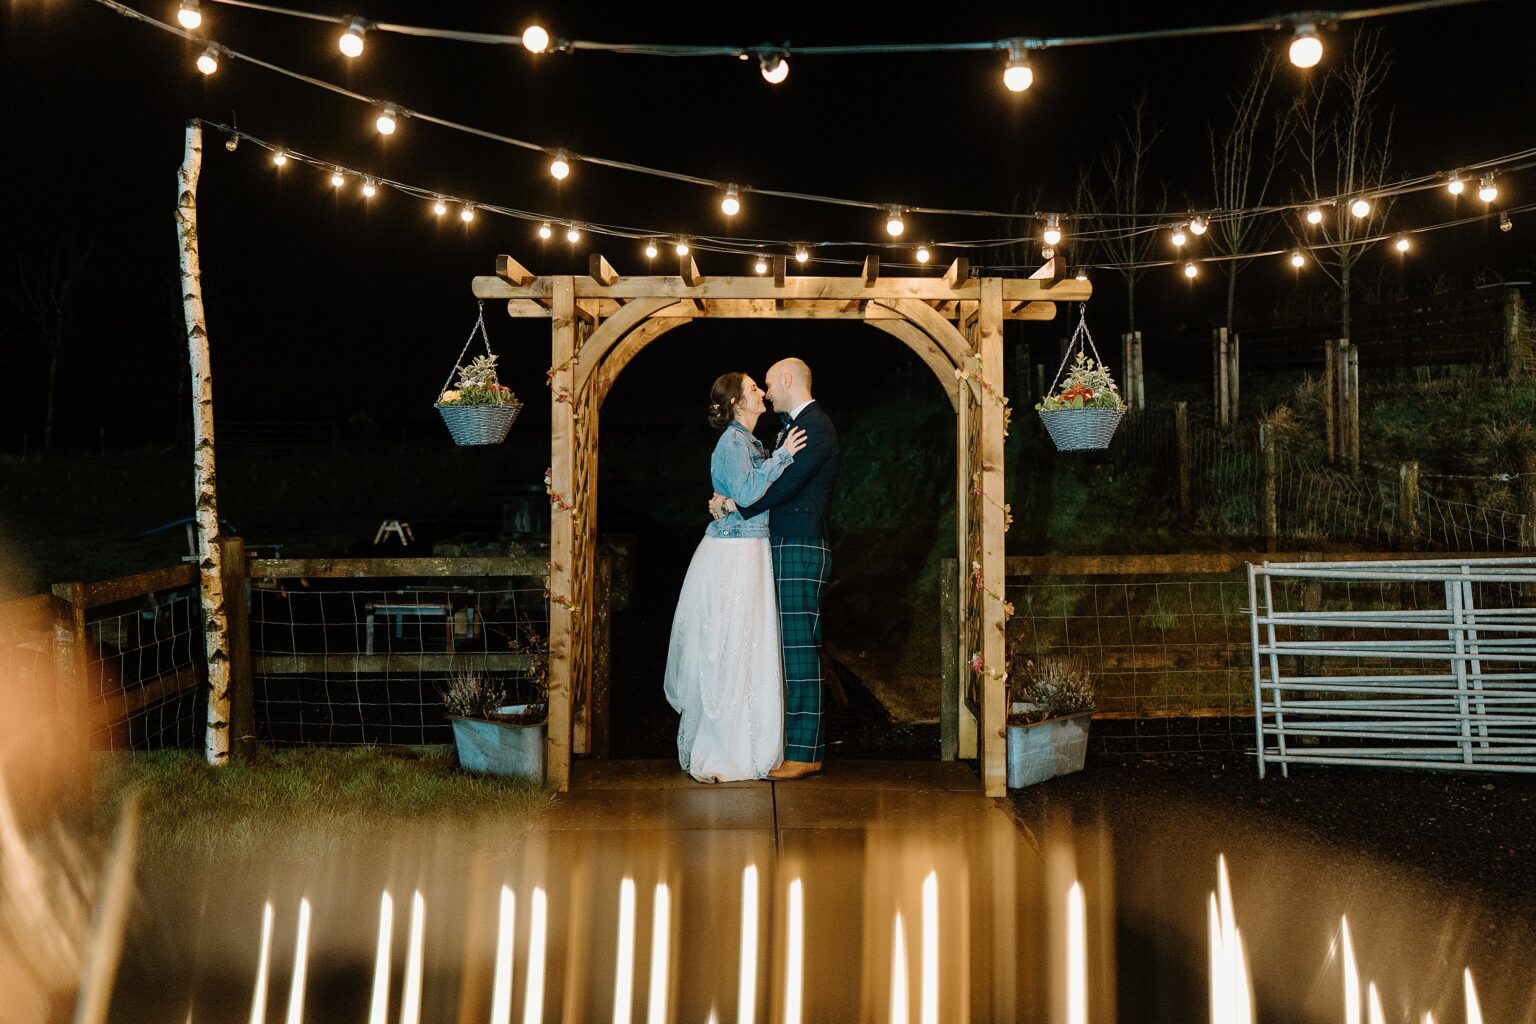 the bride and groom stand face to face beneath festoon lighting and a wooden archway with handing flower baskets at night outside their farm wedding venues scotland